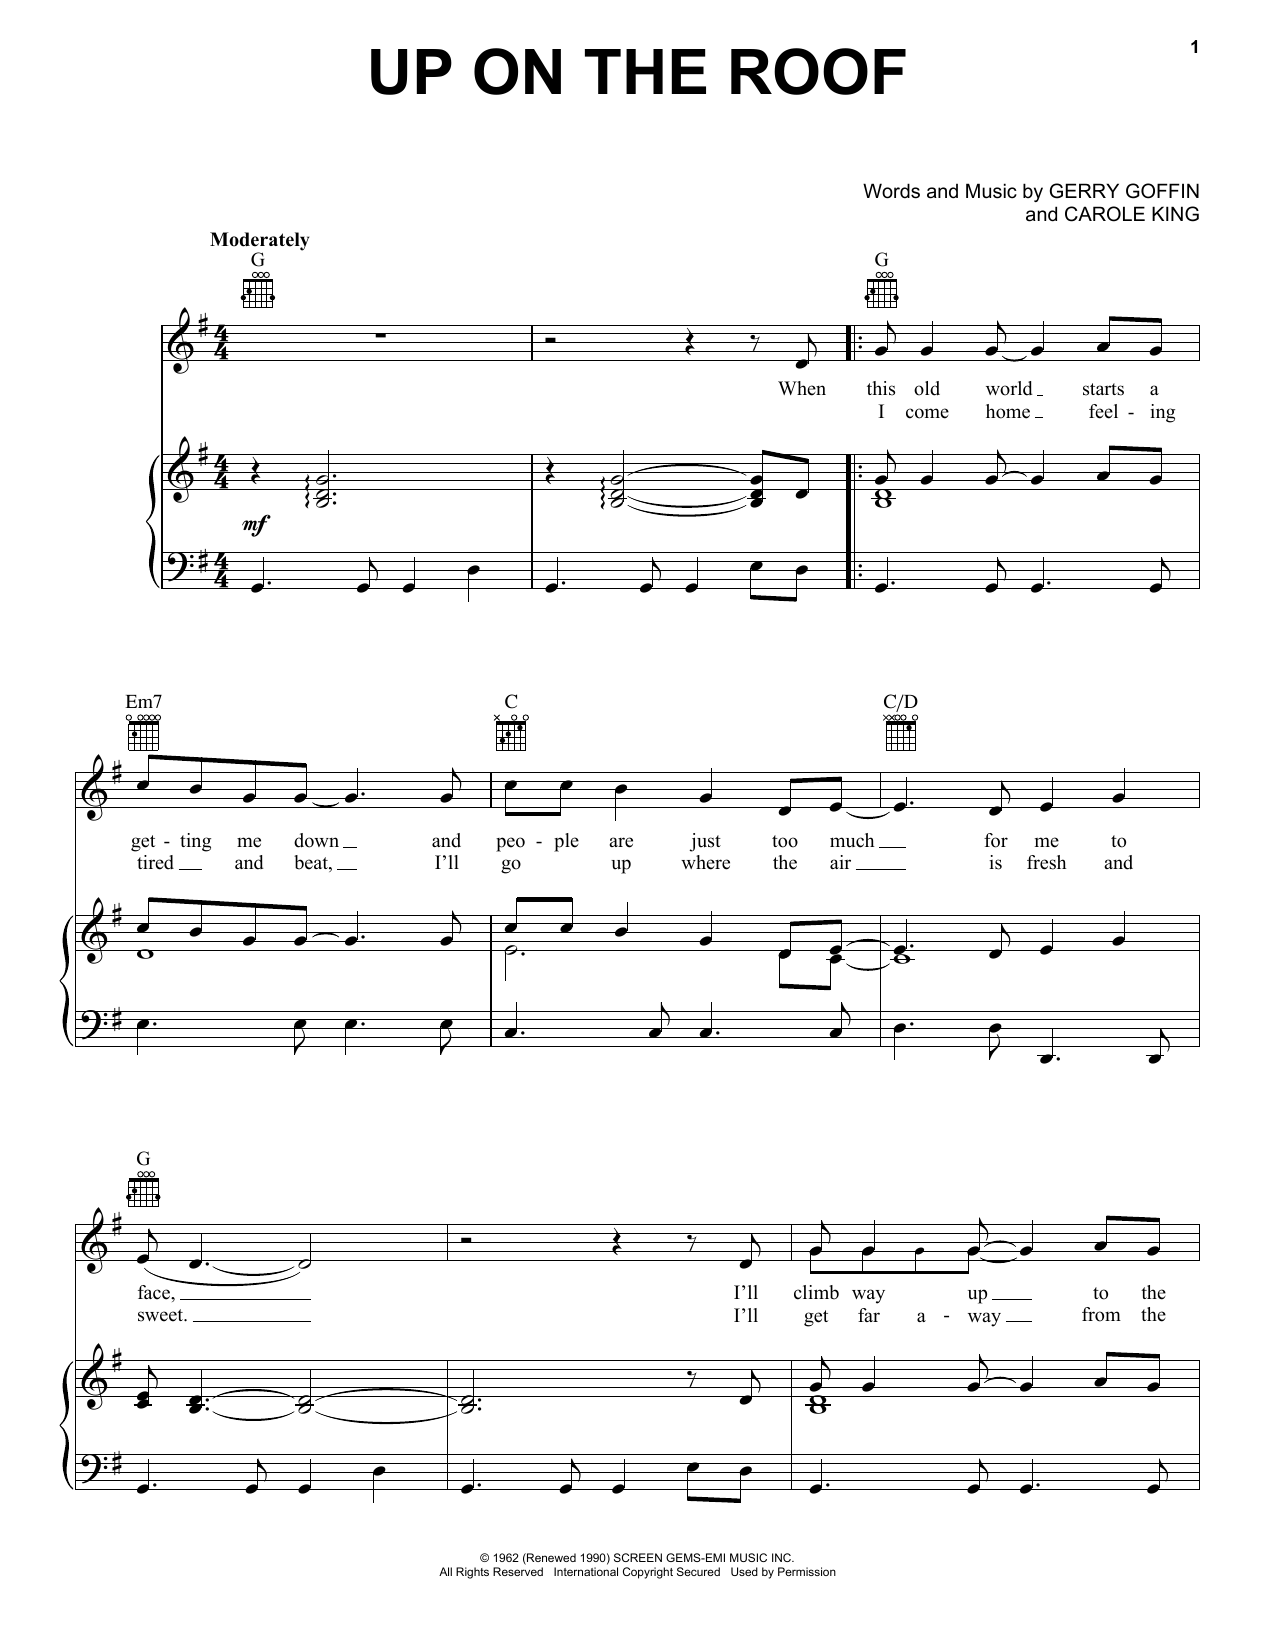 The Drifters Up On The Roof sheet music notes and chords. Download Printable PDF.